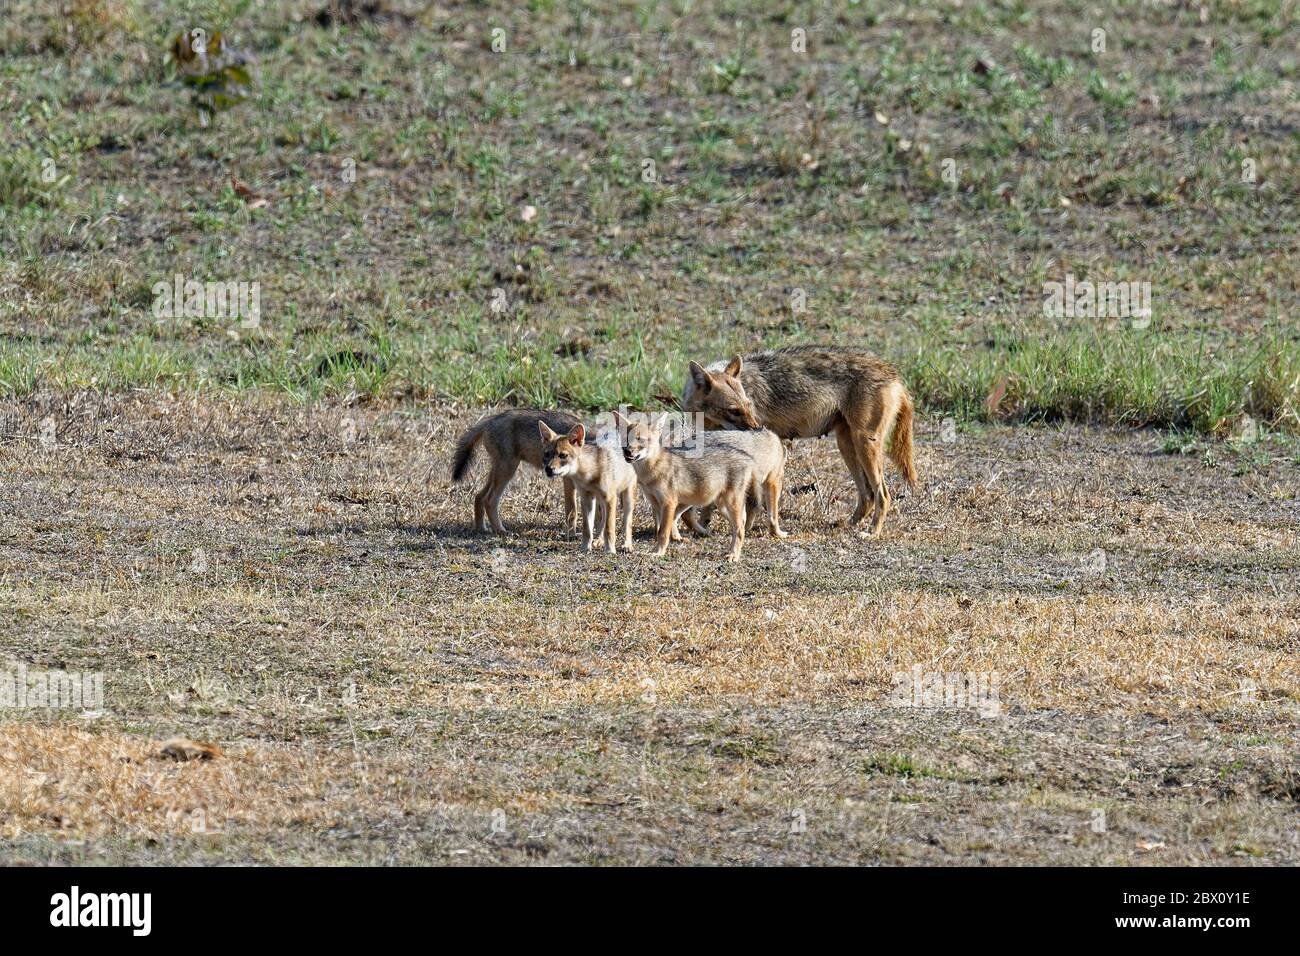 Female Indian jackal (Canis aureus) feeding and playing with her cubs, Kanha Tiger Reserve or Kanha-Kisli National Park, Madhya Pradesh state, India Stock Photo